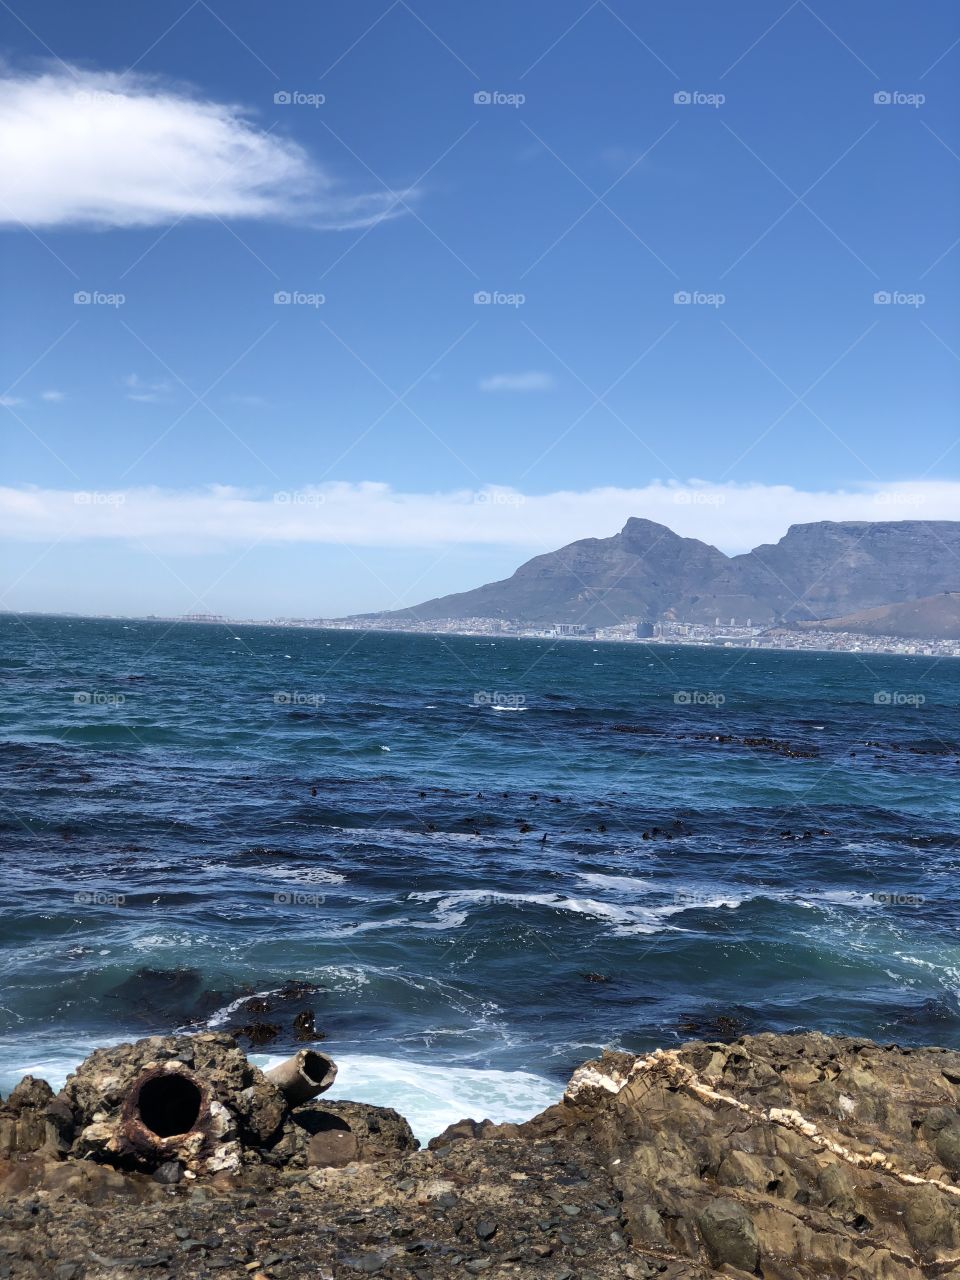  Cape Town, South Africa 2018